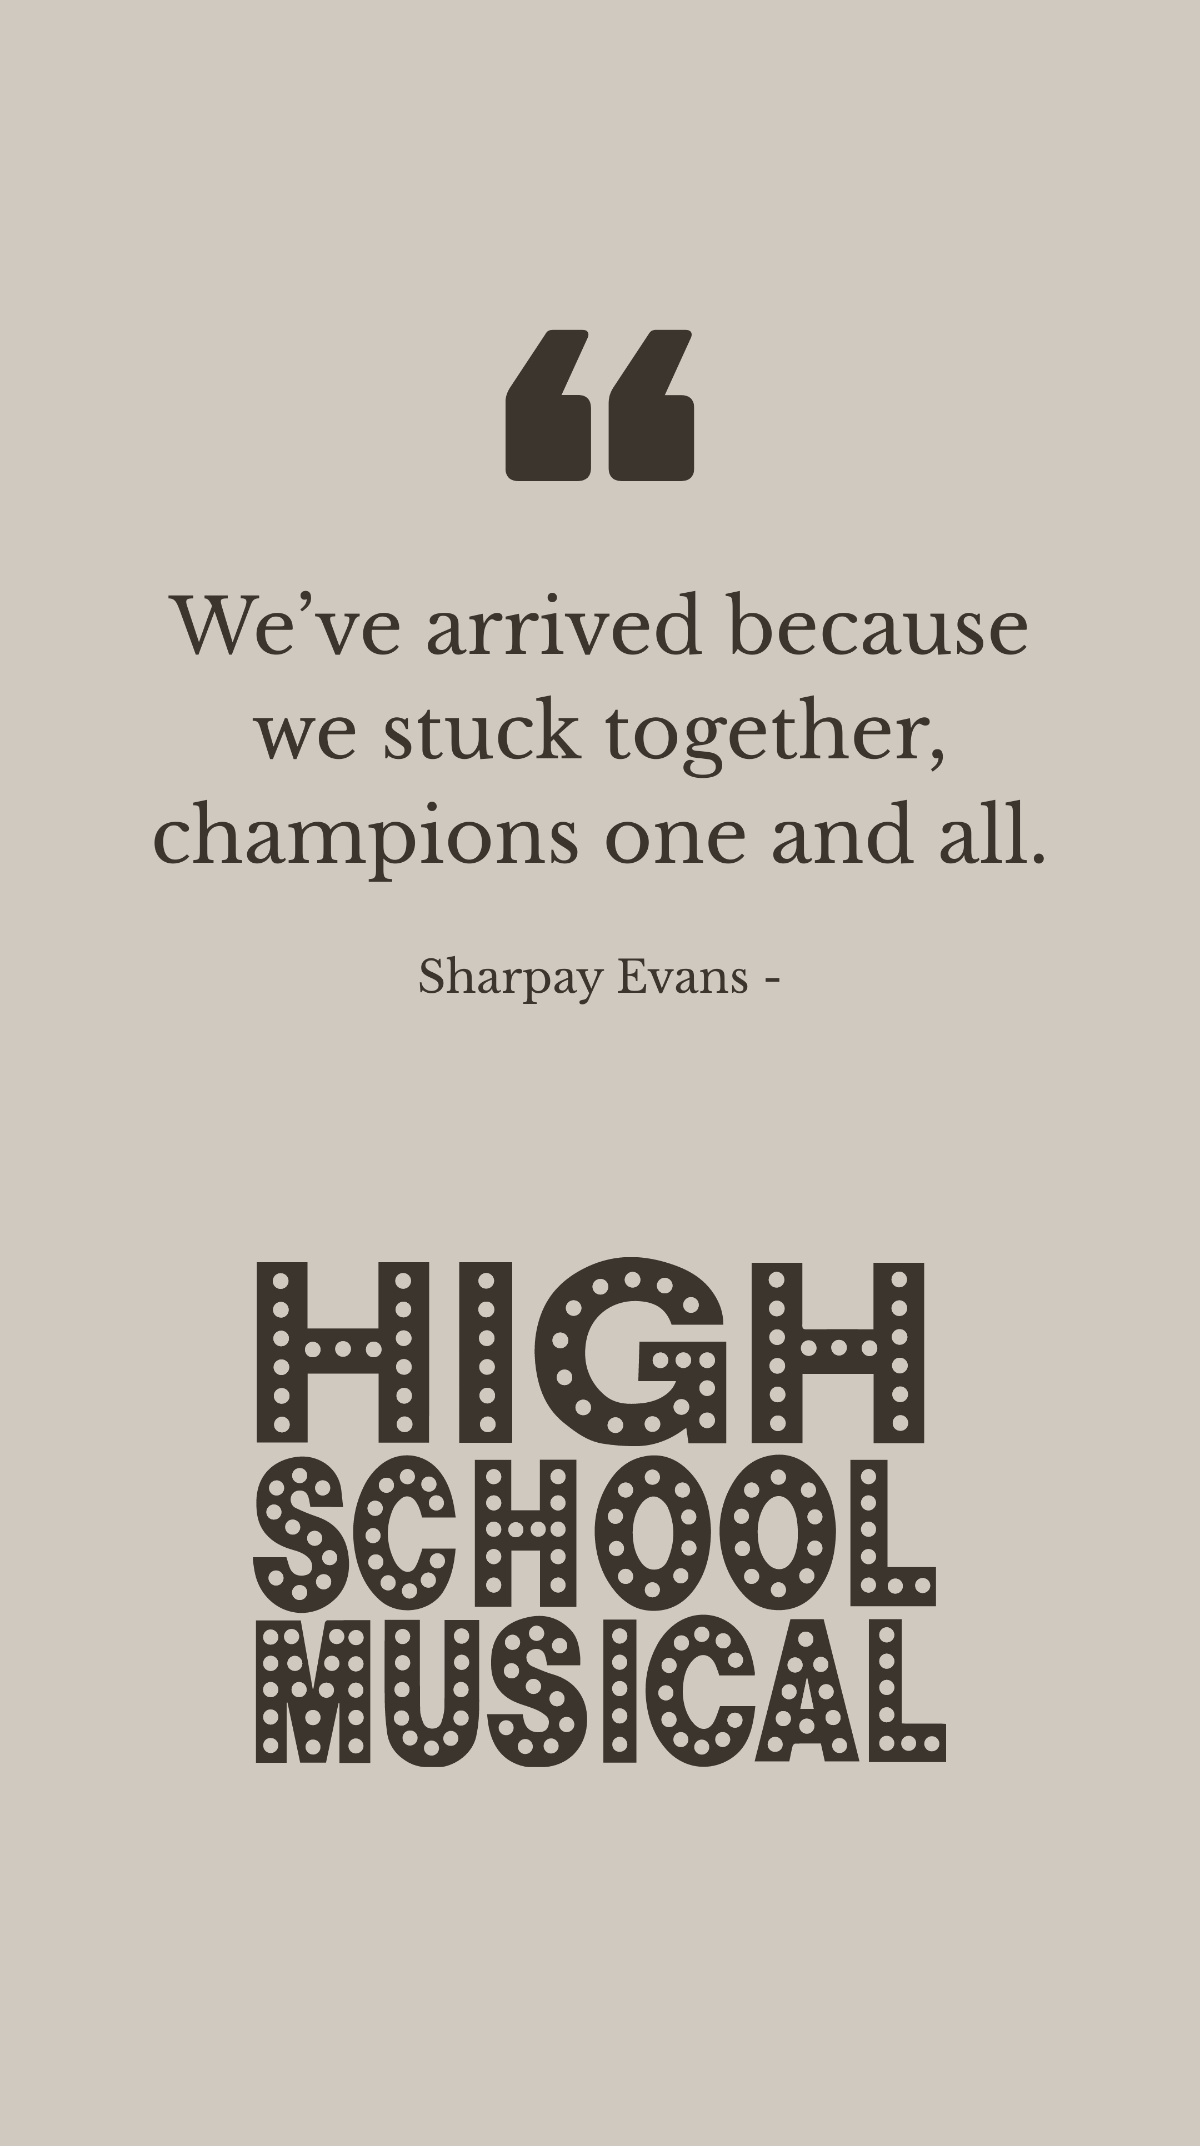 Sharpay Evans - We’ve arrived because we stuck together, champions one and all. Template